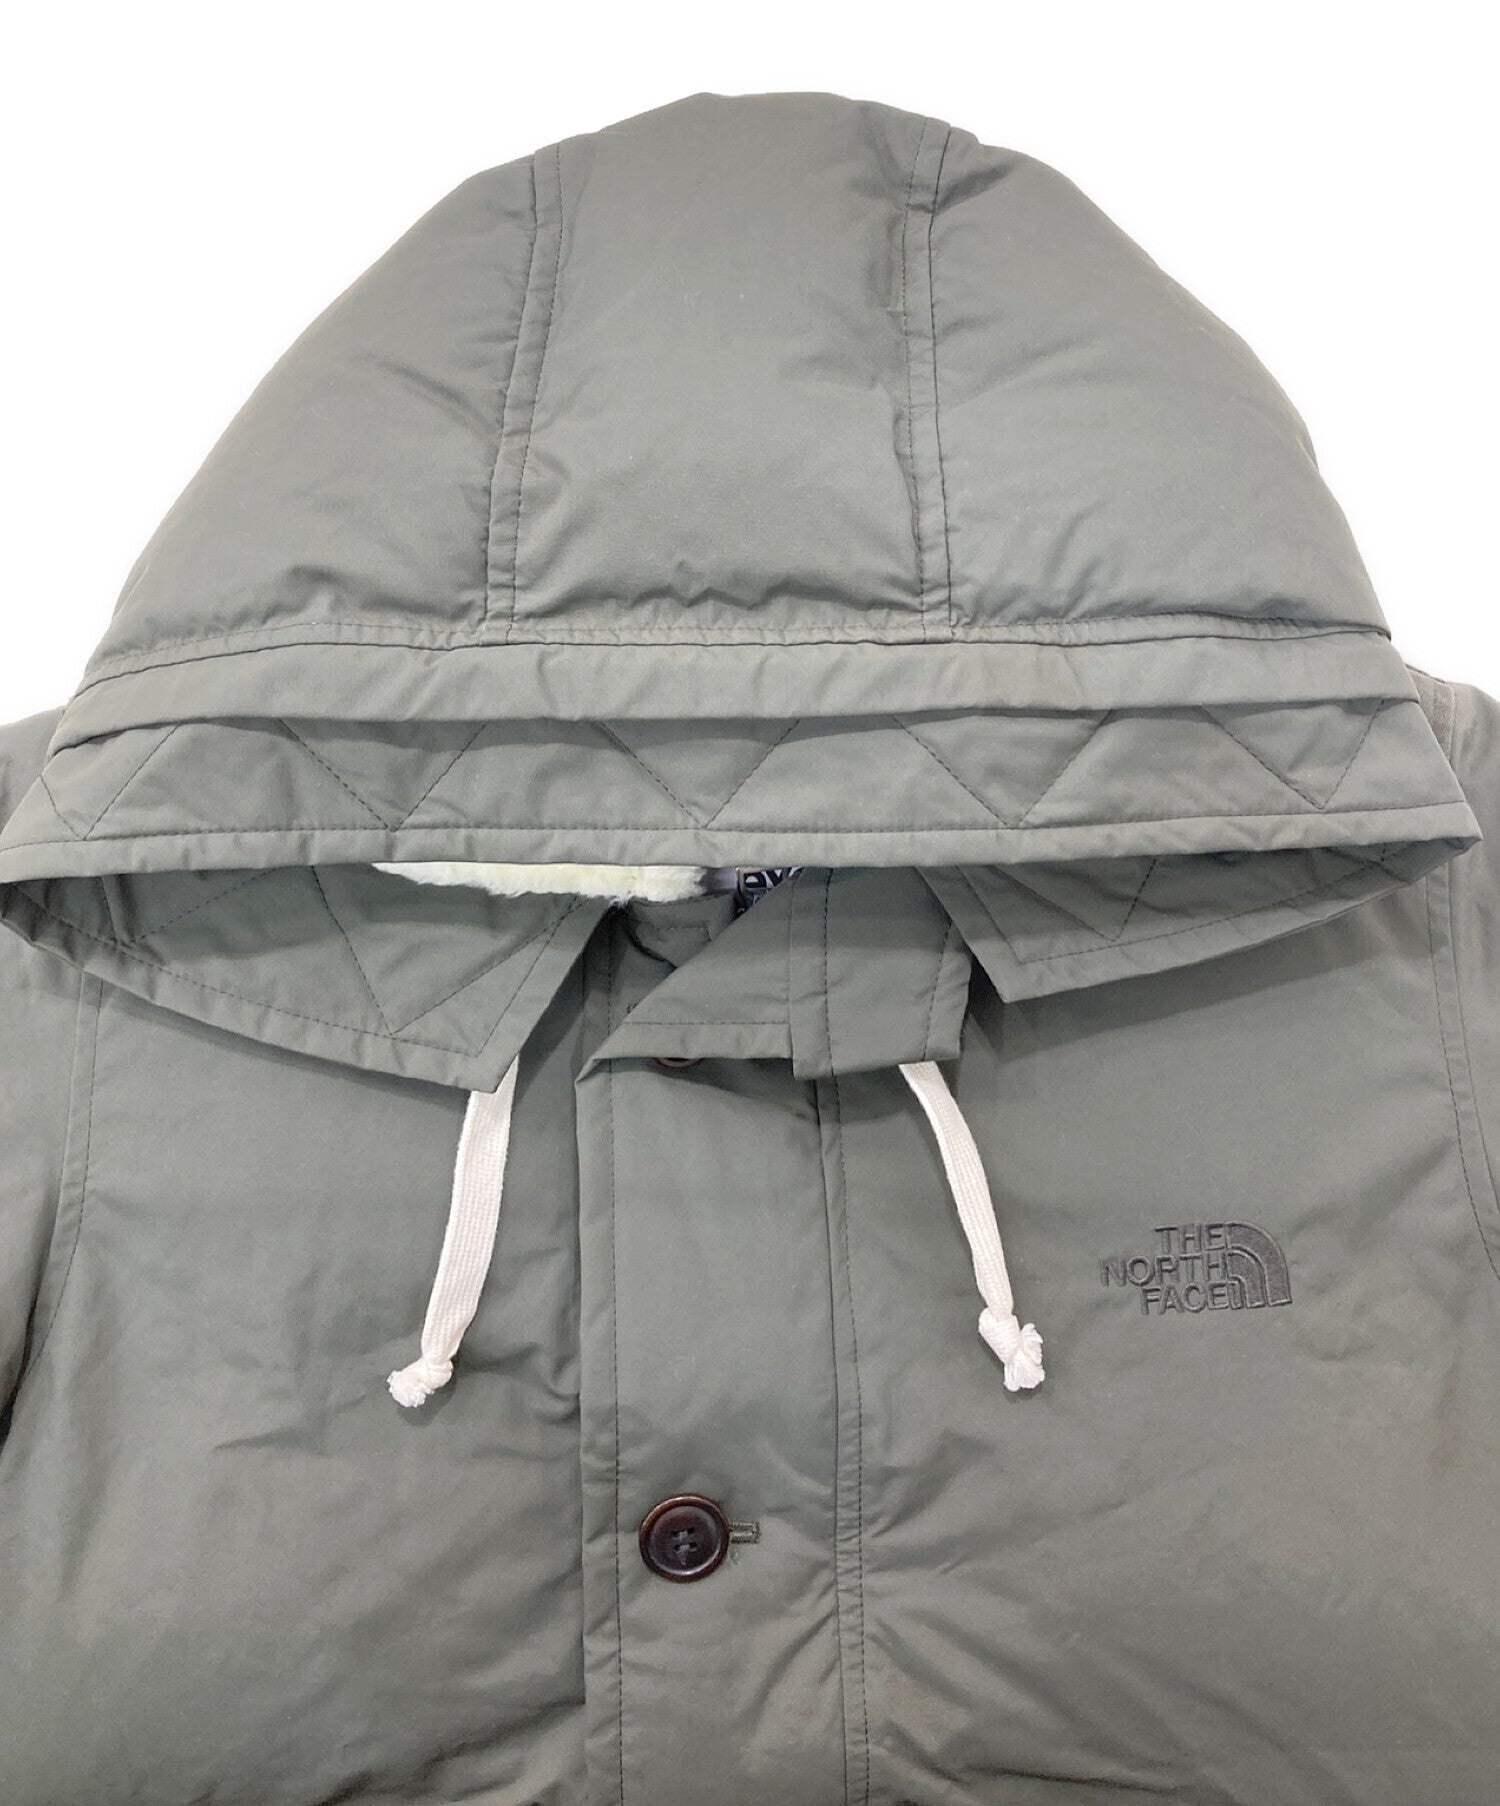 THE NORTH FACE×eYe COMME des GARCONS JUNYAWATANABE Collaboration